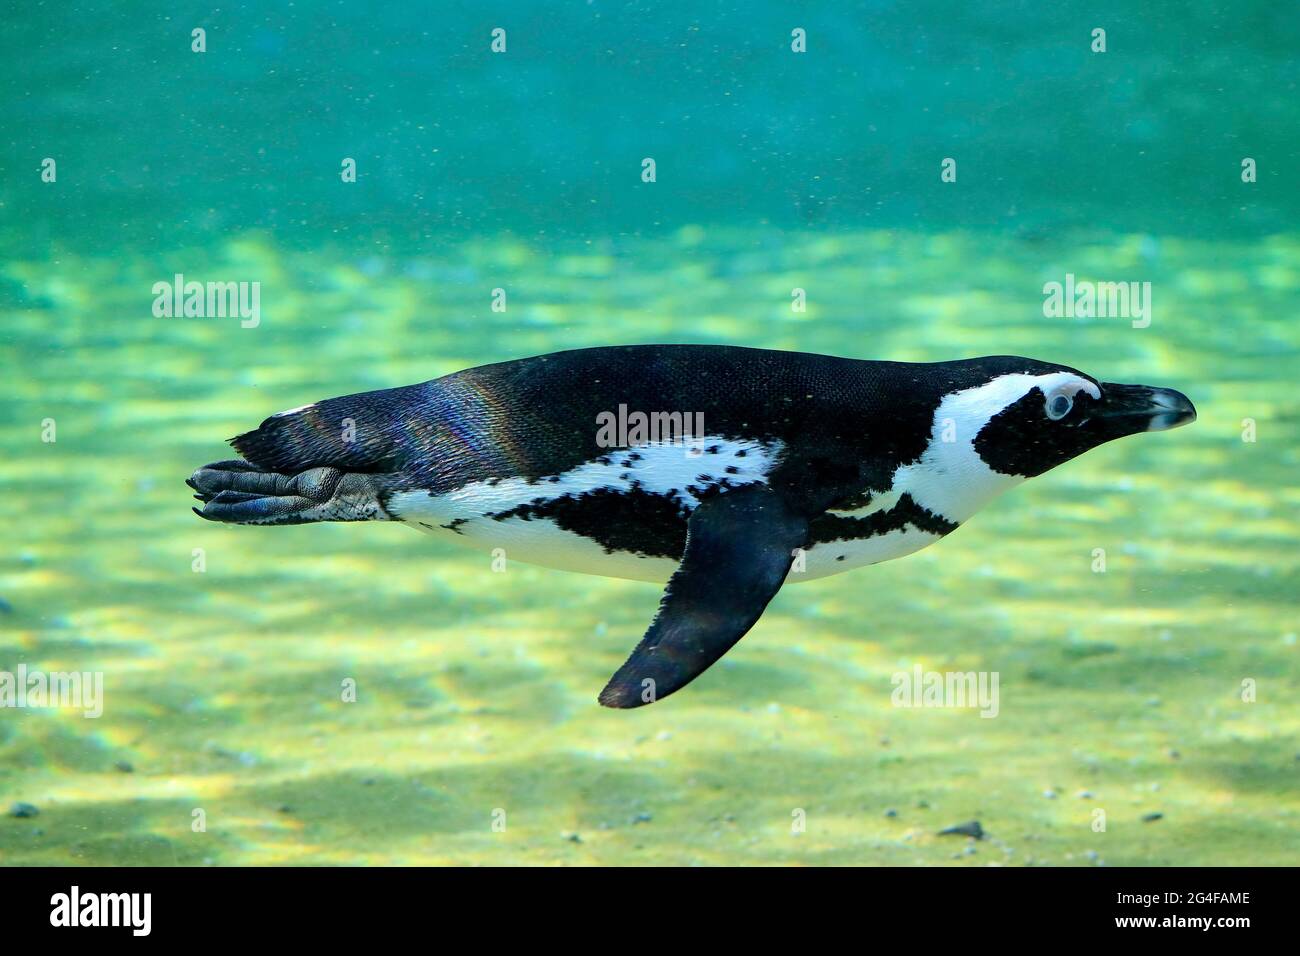 African penguin (Spheniscus demersus), adult, in water, swimming, captive, South Africa Stock Photo